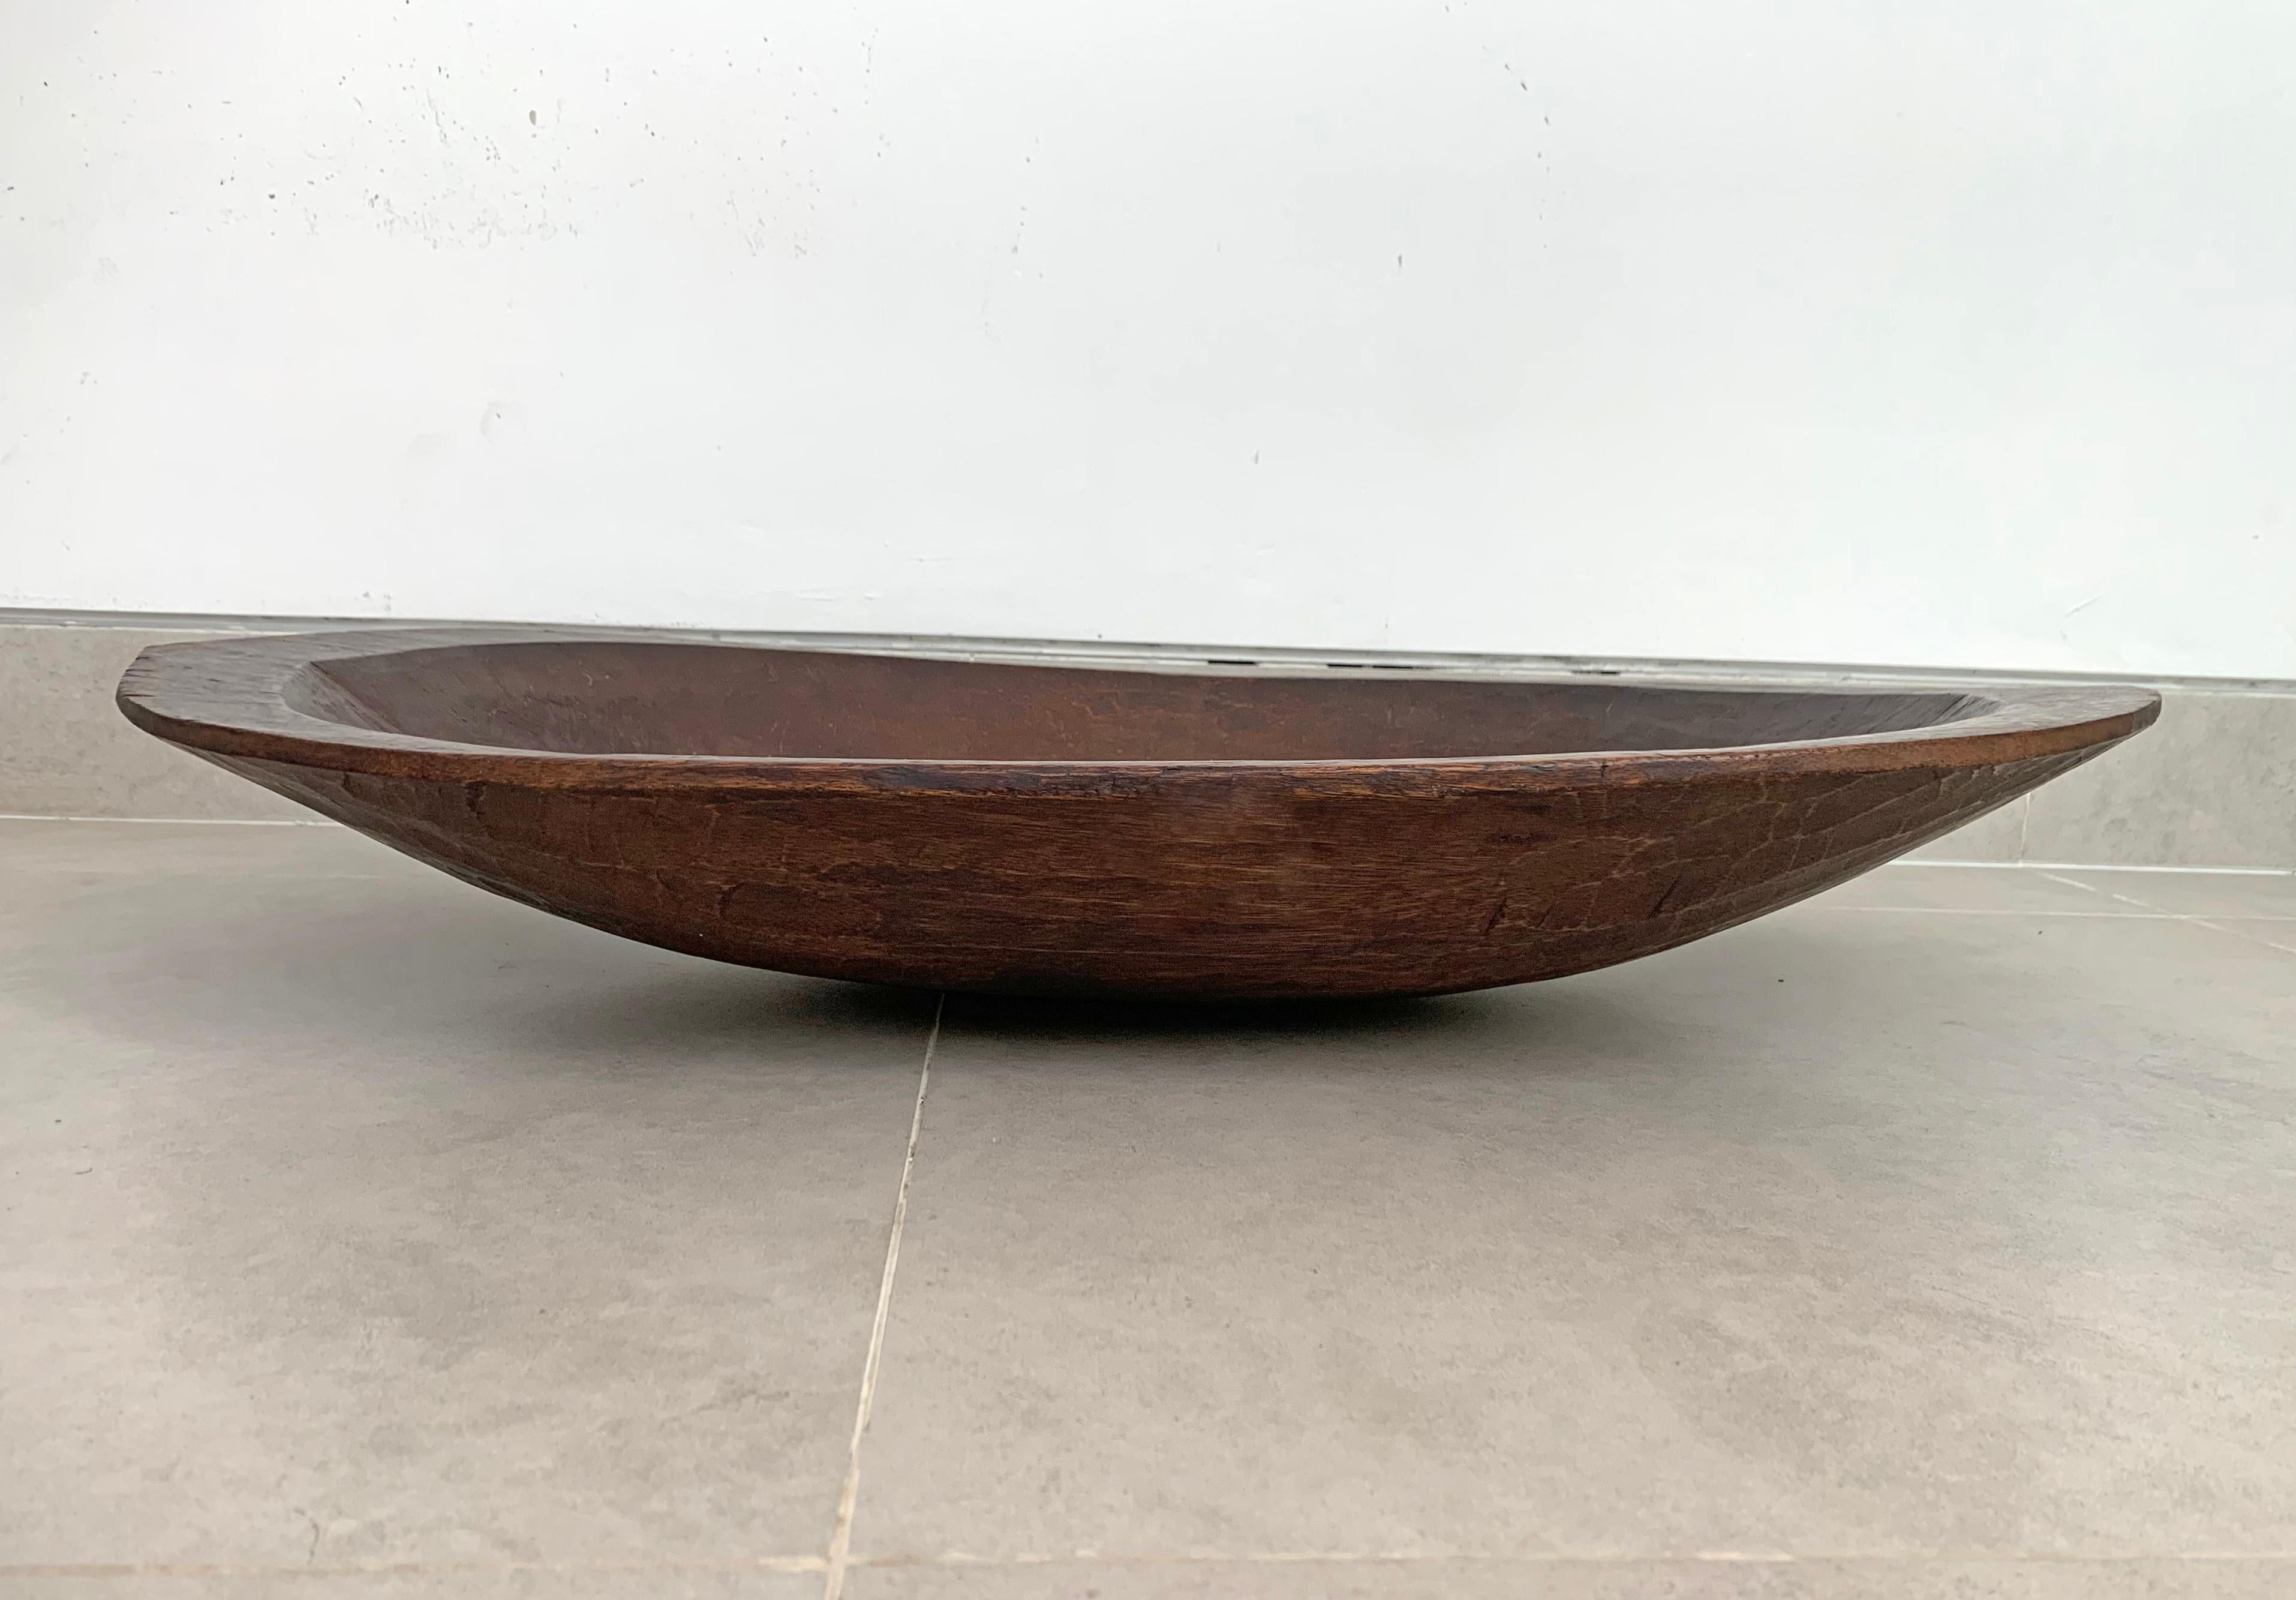 Hand-Carved Wooden Tray / Bowl Mentawai Tribe of Indonesia, Mid-20th Century In Good Condition For Sale In Jimbaran, Bali